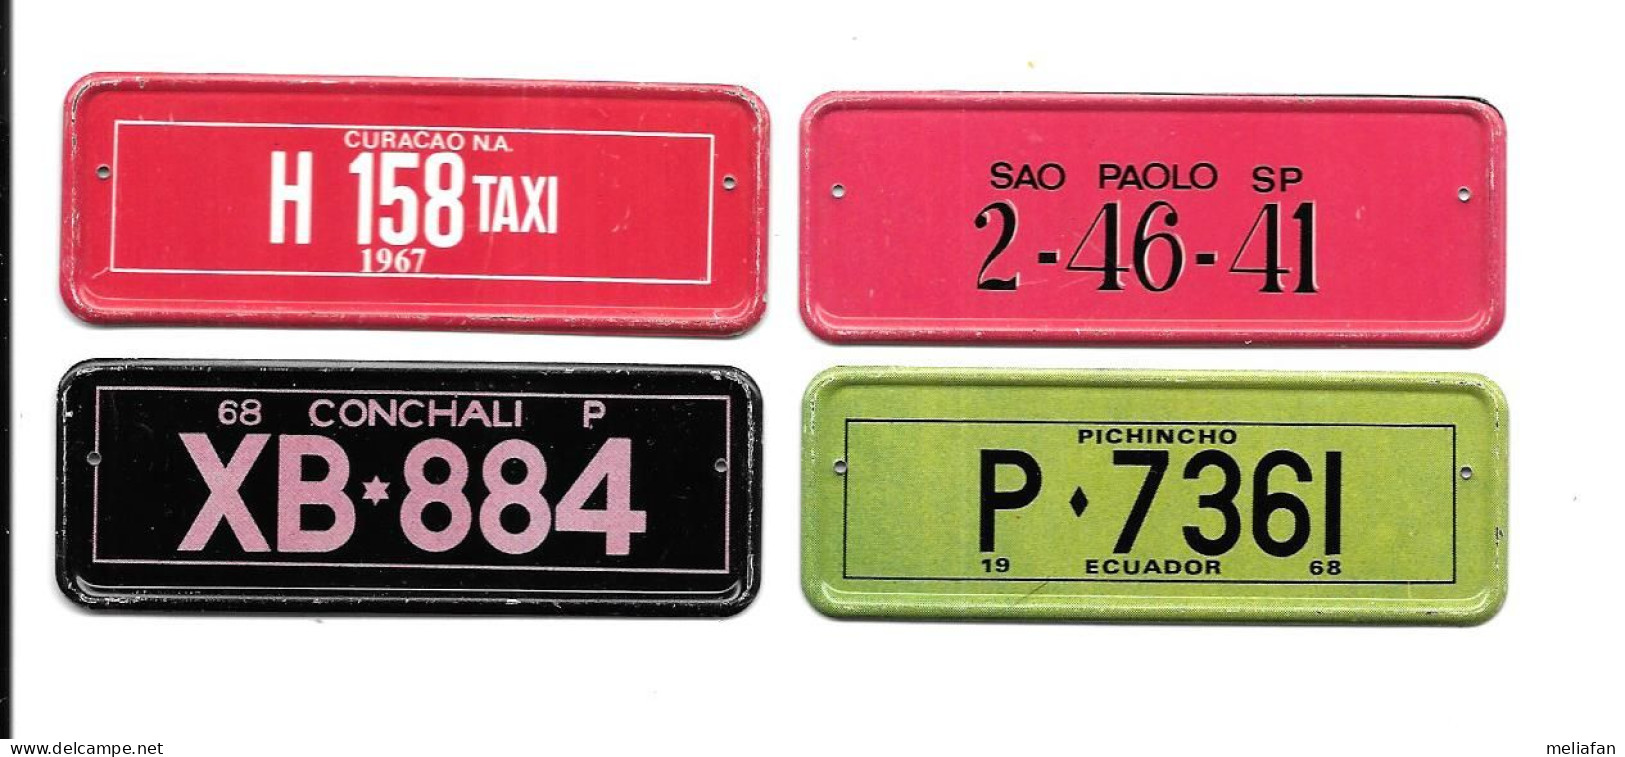 GF2320 - MINI PLAQUES CAFES ROMBOUTS - CHILI - BRESIL - EQUATEUR - CURACAO - Number Plates